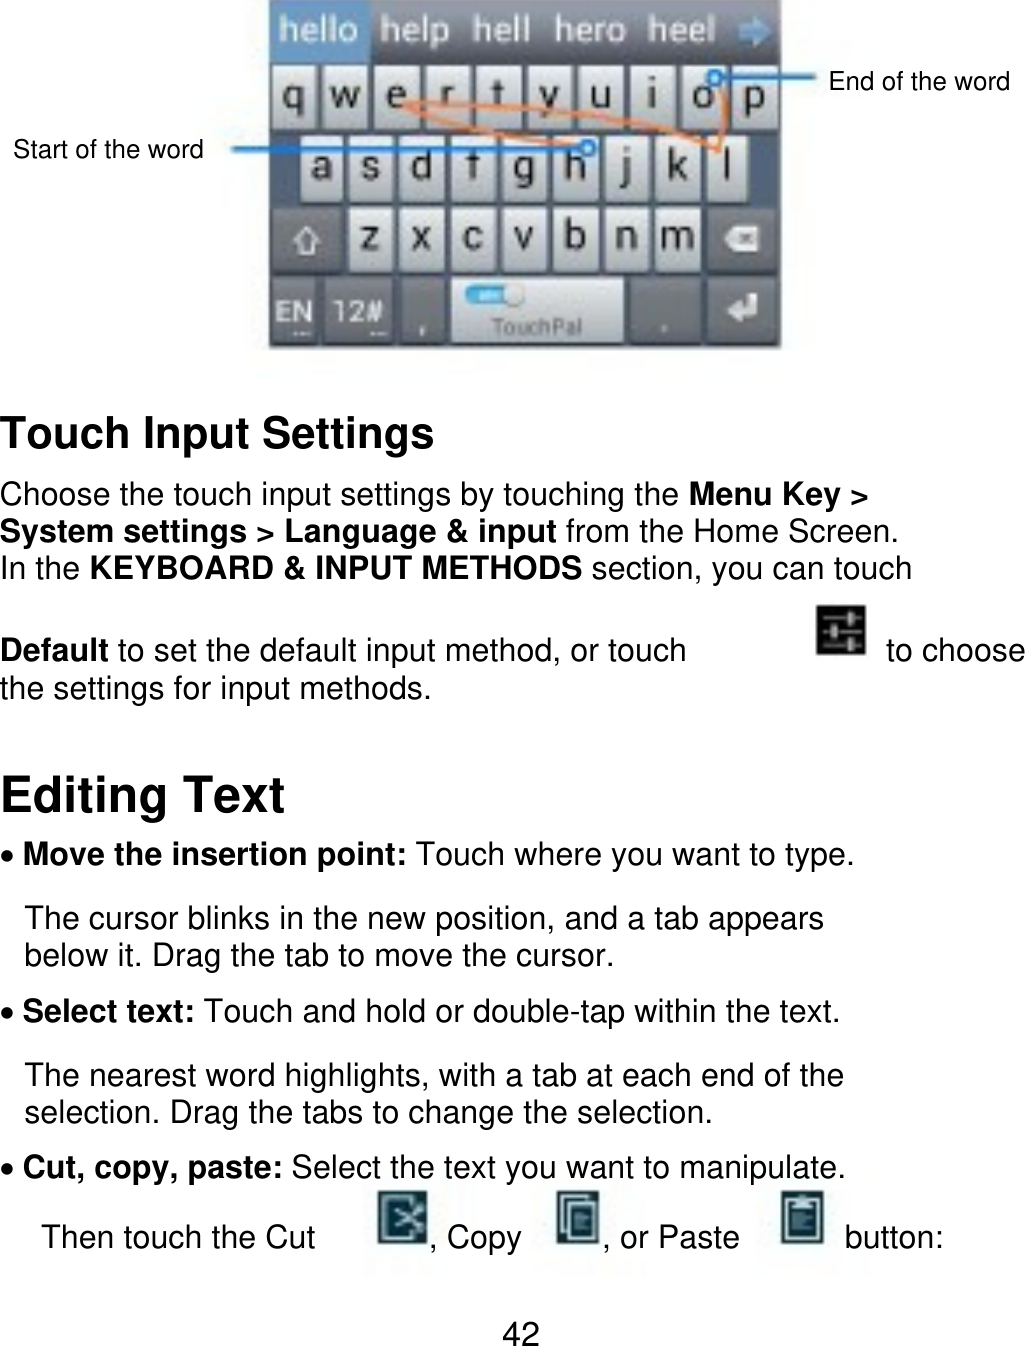 End of the word Start of the word Touch Input Settings Choose the touch input settings by touching the Menu Key &gt; System settings &gt; Language &amp; input from the Home Screen. In the KEYBOARD &amp; INPUT METHODS section, you can touch Default to set the default input method, or touch the settings for input methods. to choose Editing Text Move the insertion point: Touch where you want to type. The cursor blinks in the new position, and a tab appears below it. Drag the tab to move the cursor. Select text: Touch and hold or double-tap within the text. The nearest word highlights, with a tab at each end of the selection. Drag the tabs to change the selection. Cut, copy, paste: Select the text you want to manipulate. Then touch the Cut , Copy , or Paste button: 42 